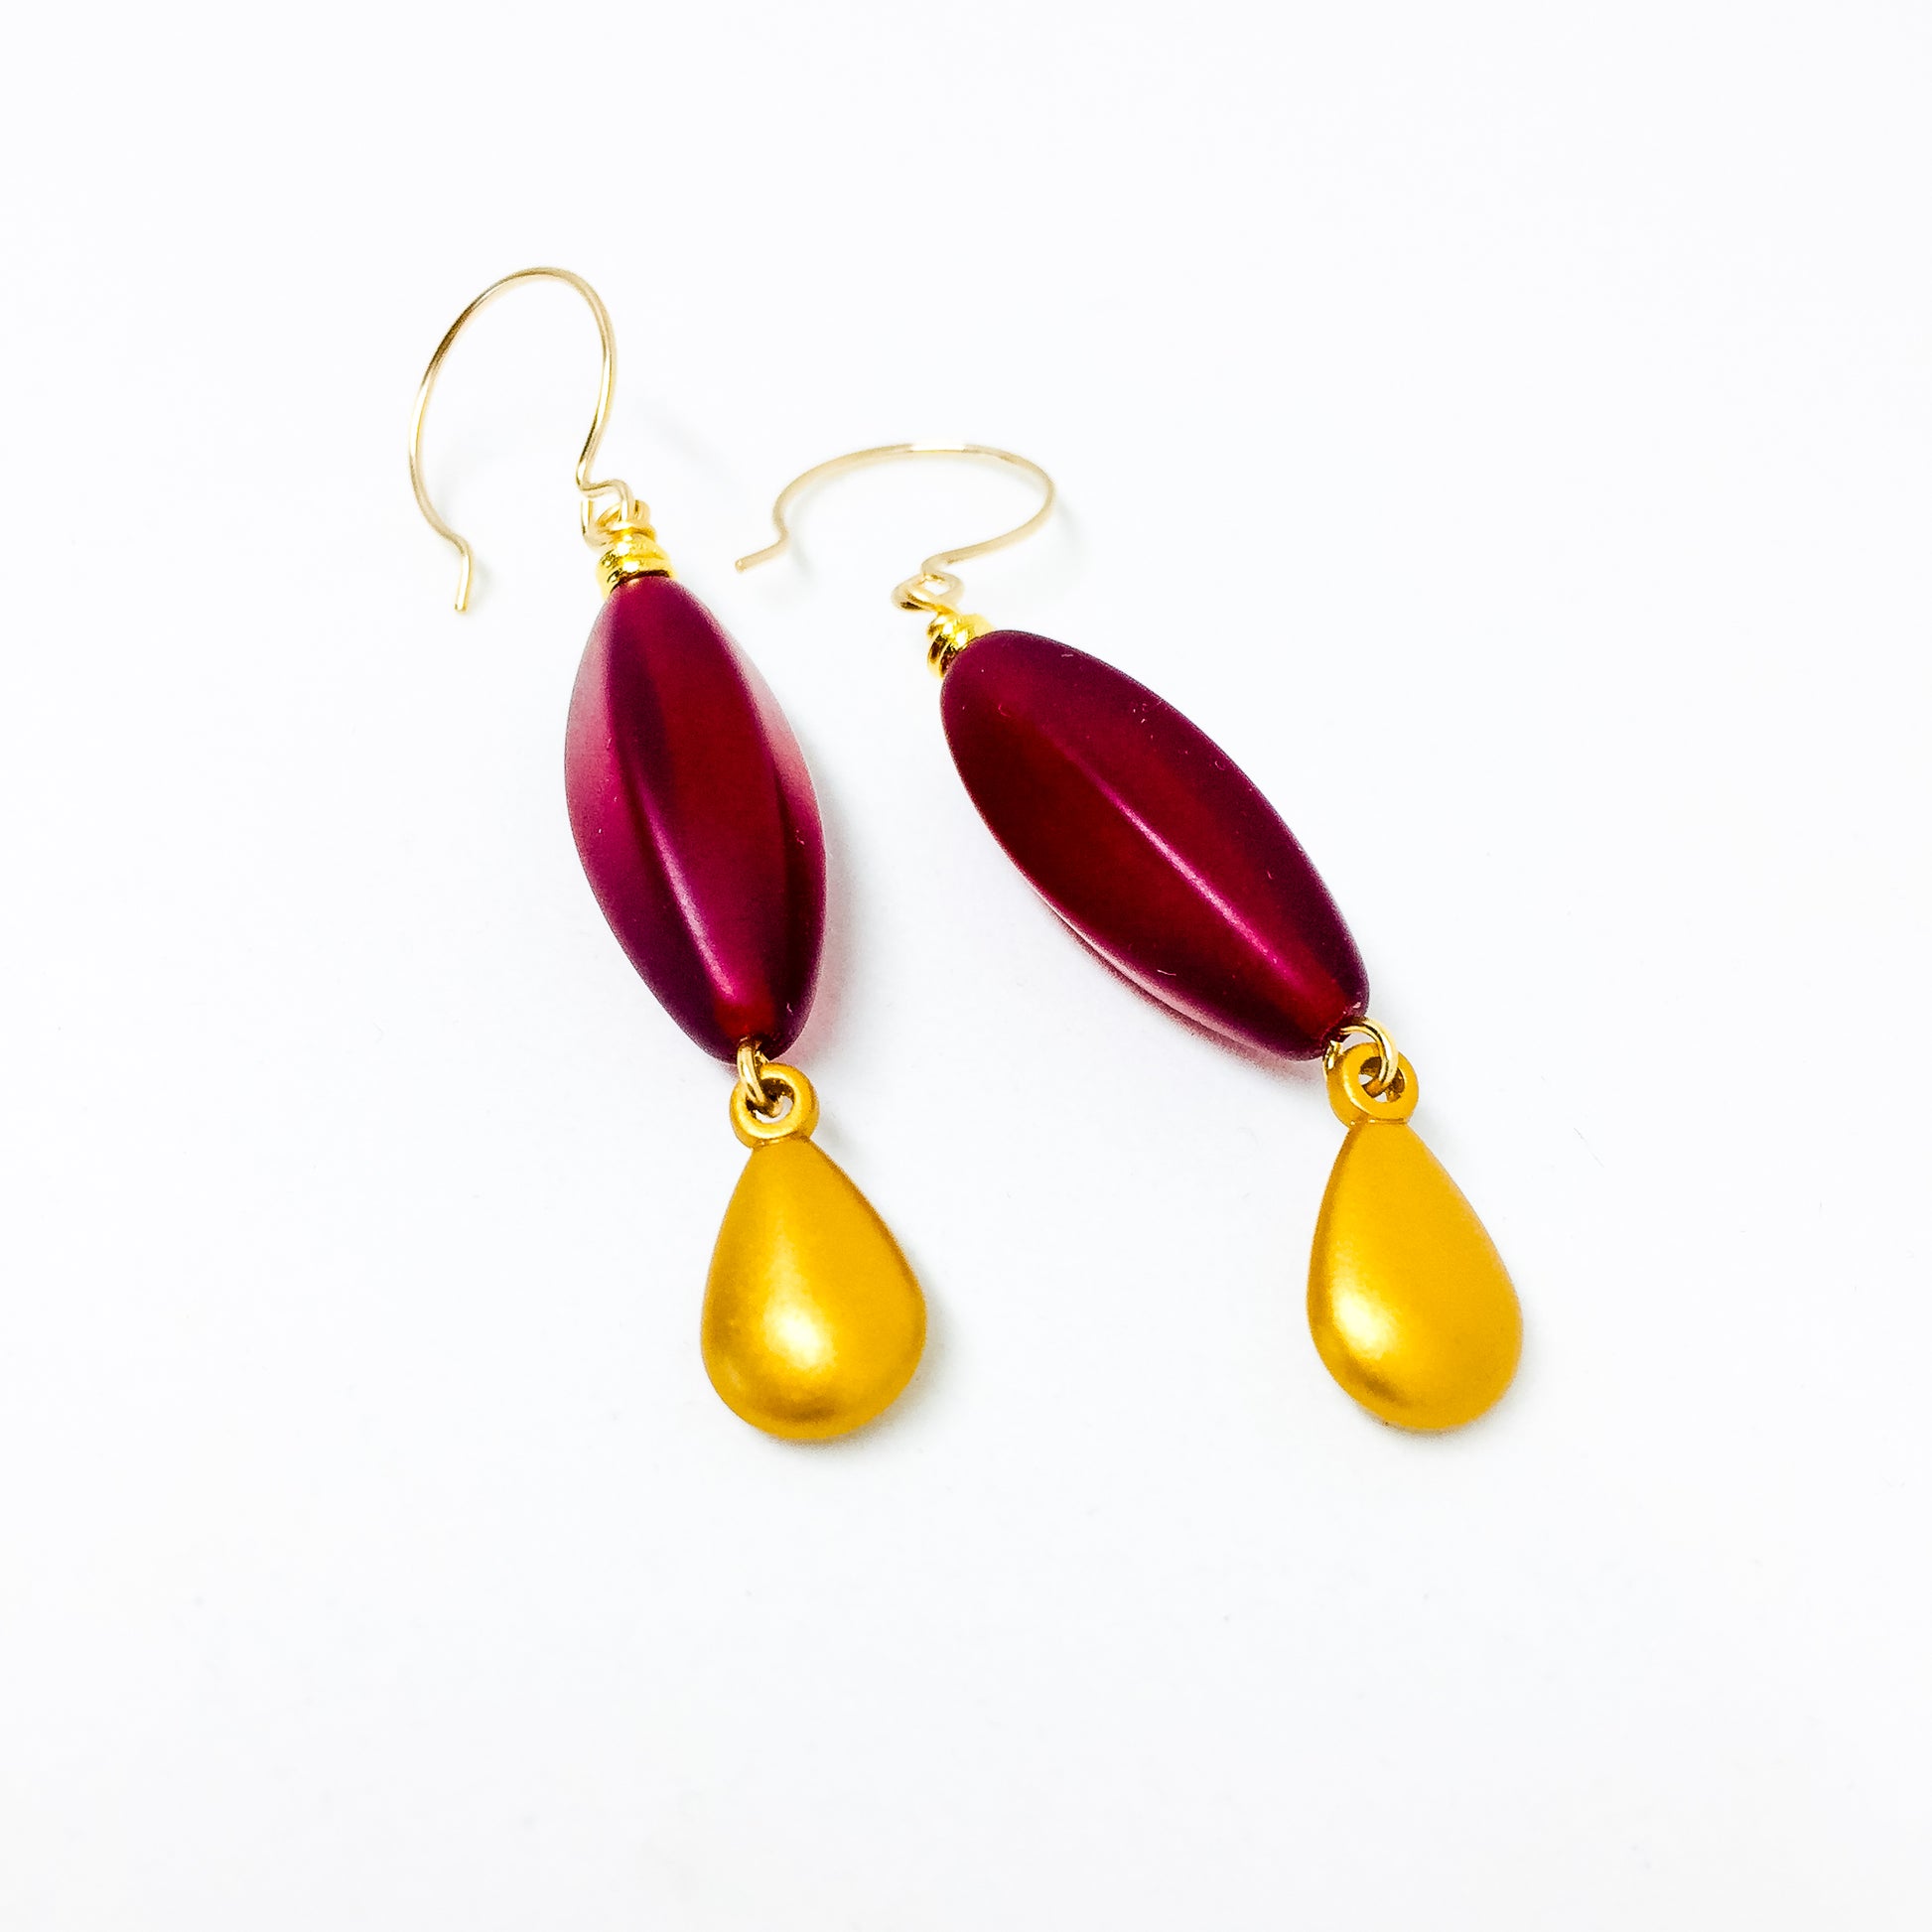 Ruby frosted Czech glass bead drop earrings with gold charm